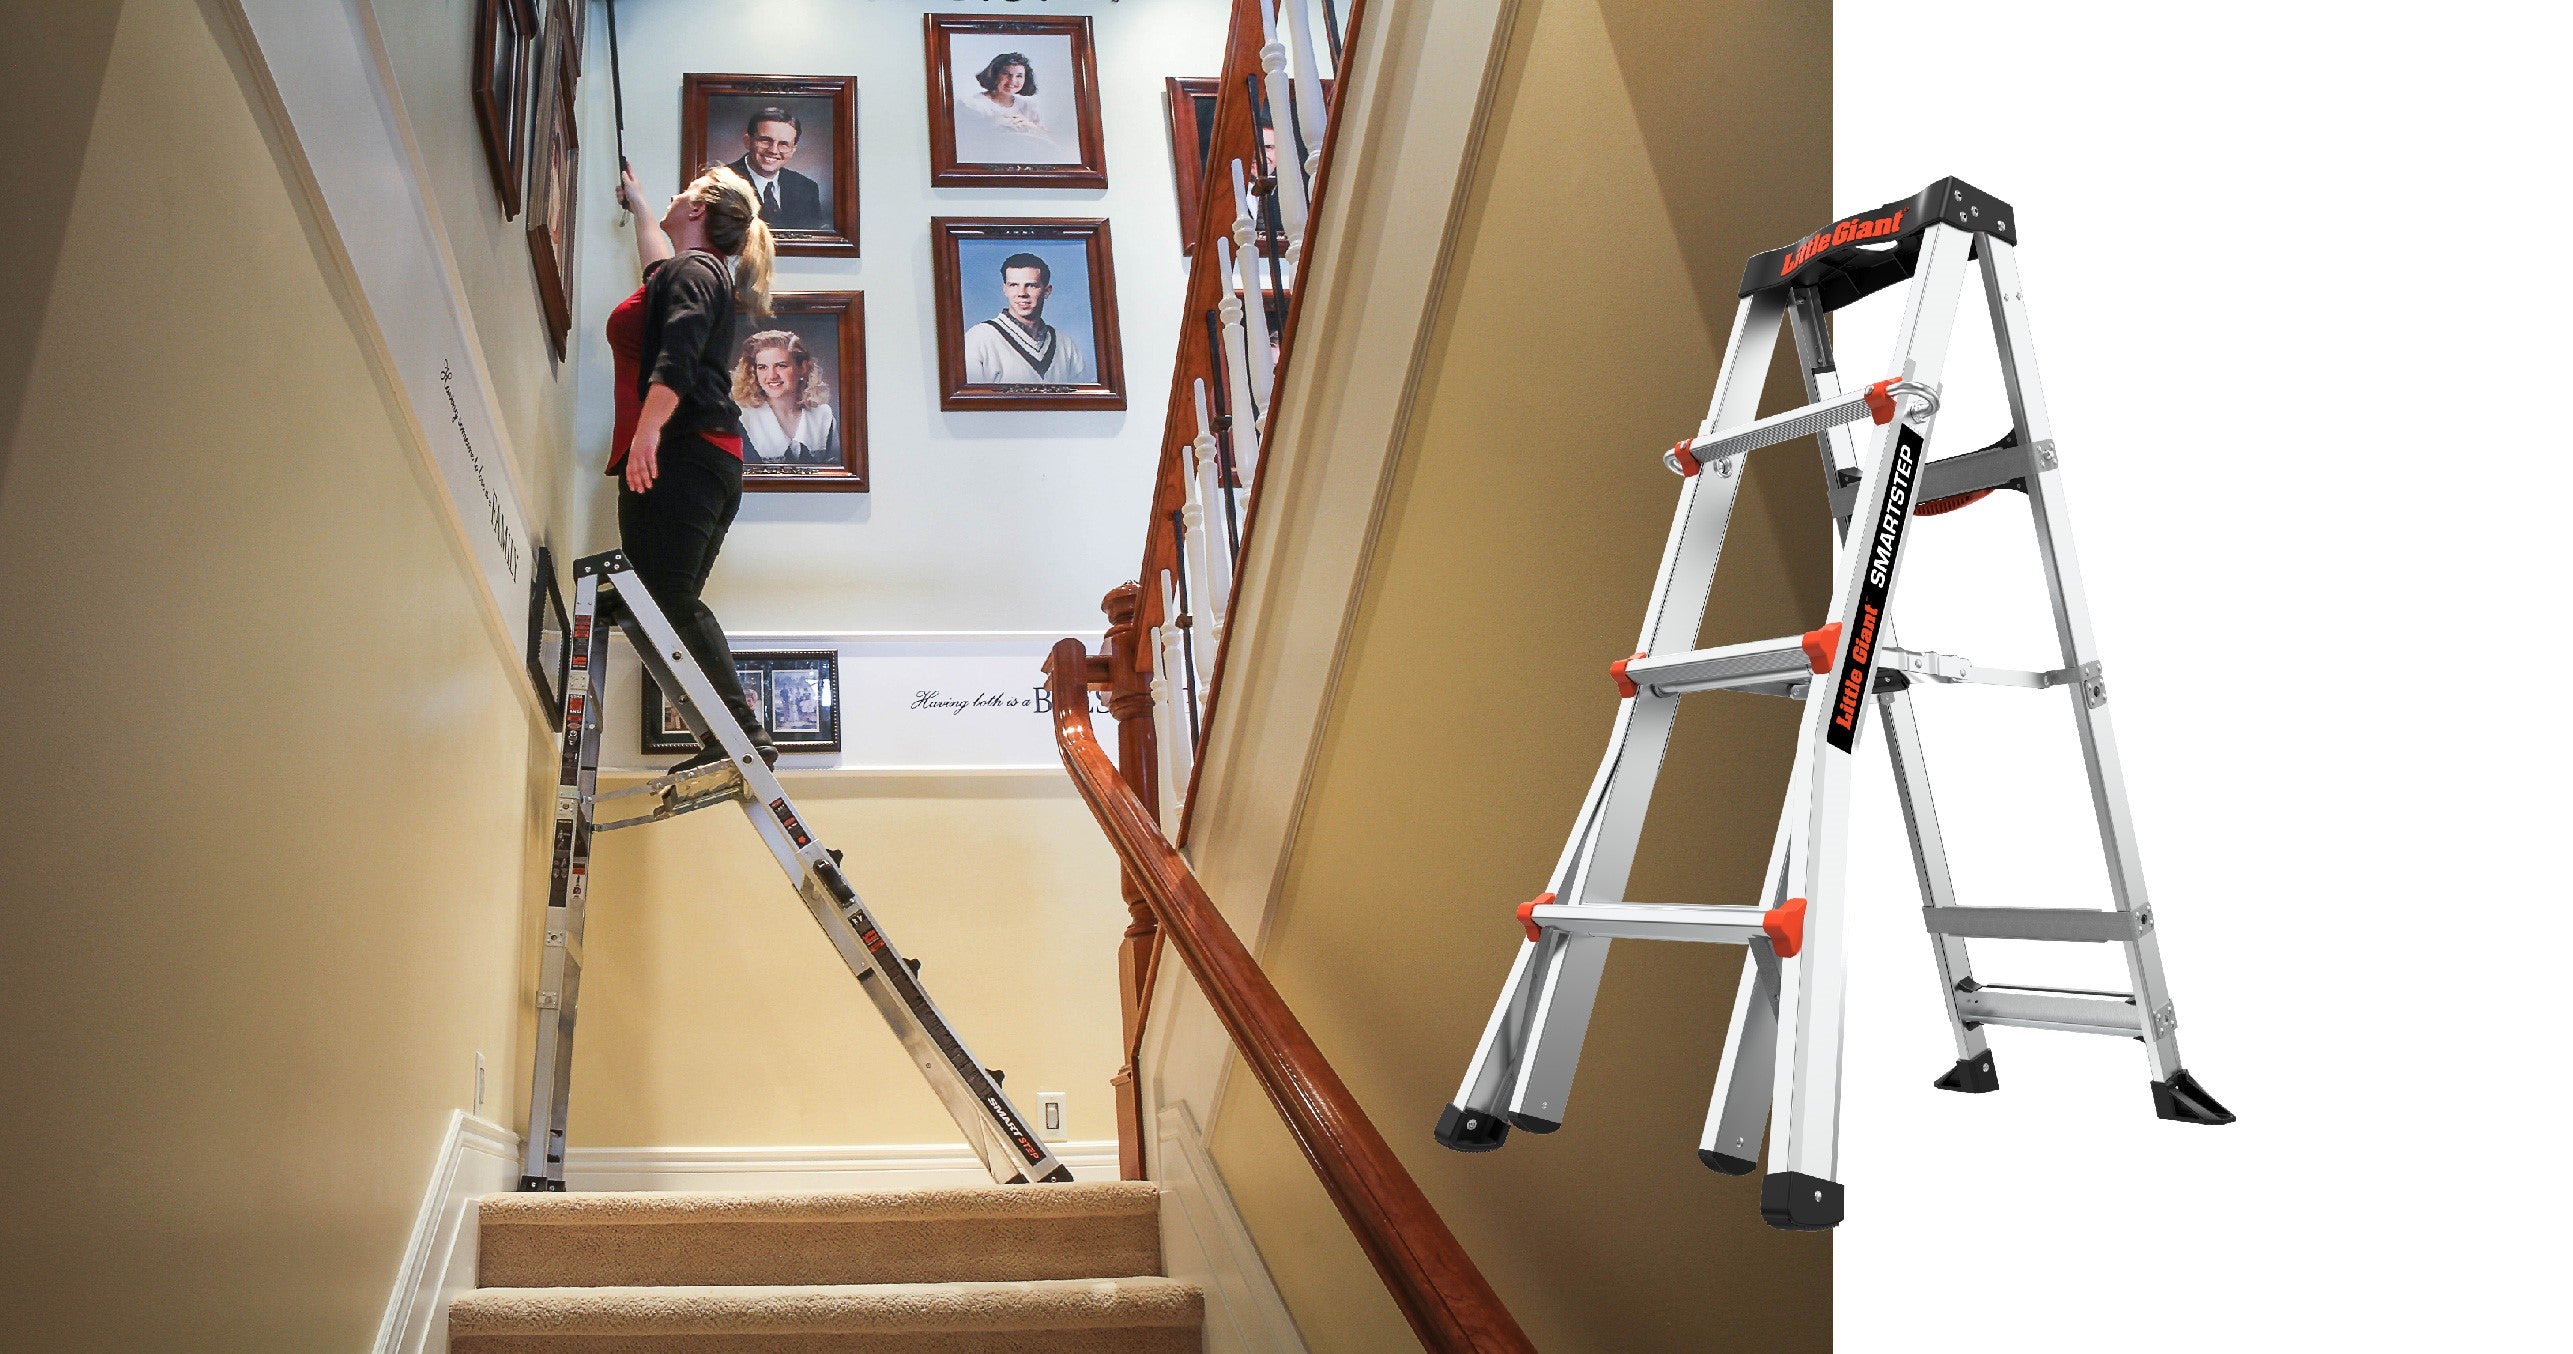 A women on a ladder cleaning walls in a house